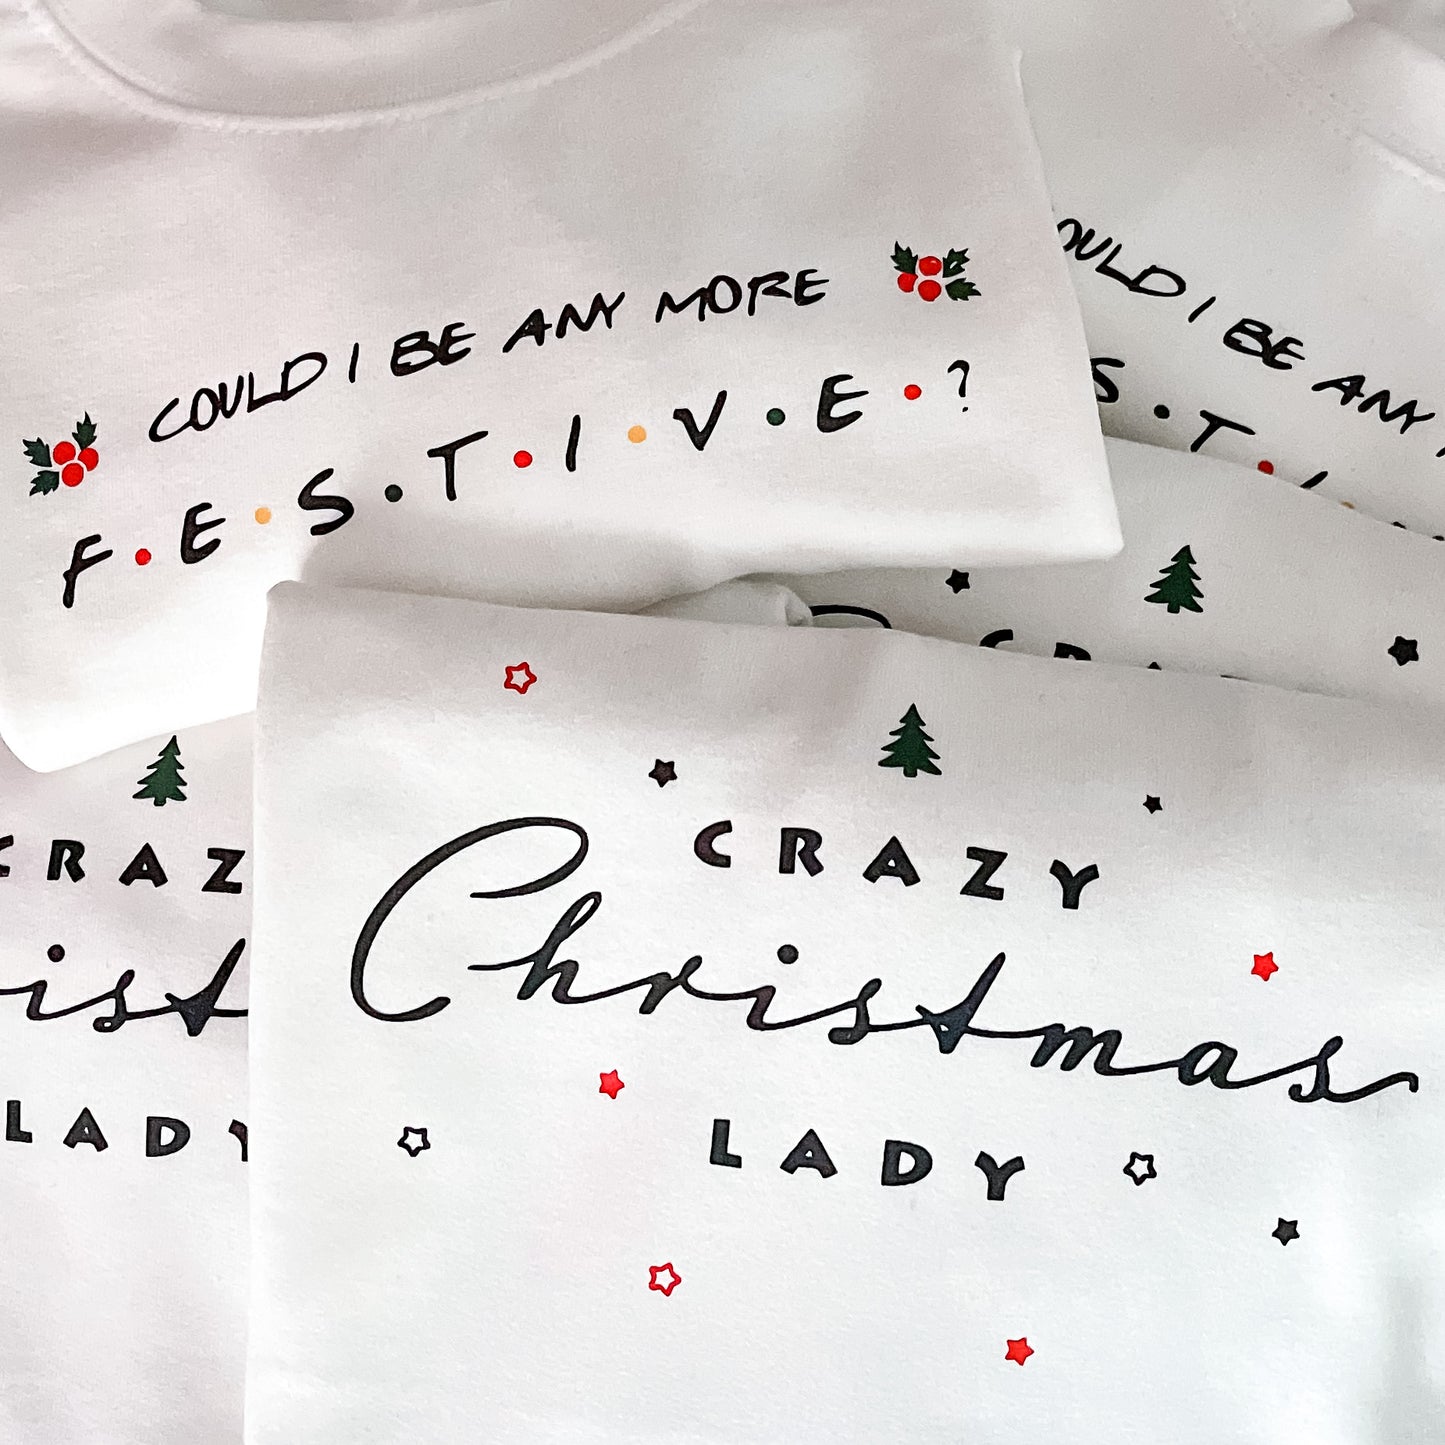 Crazy Christmas Lady Sweater